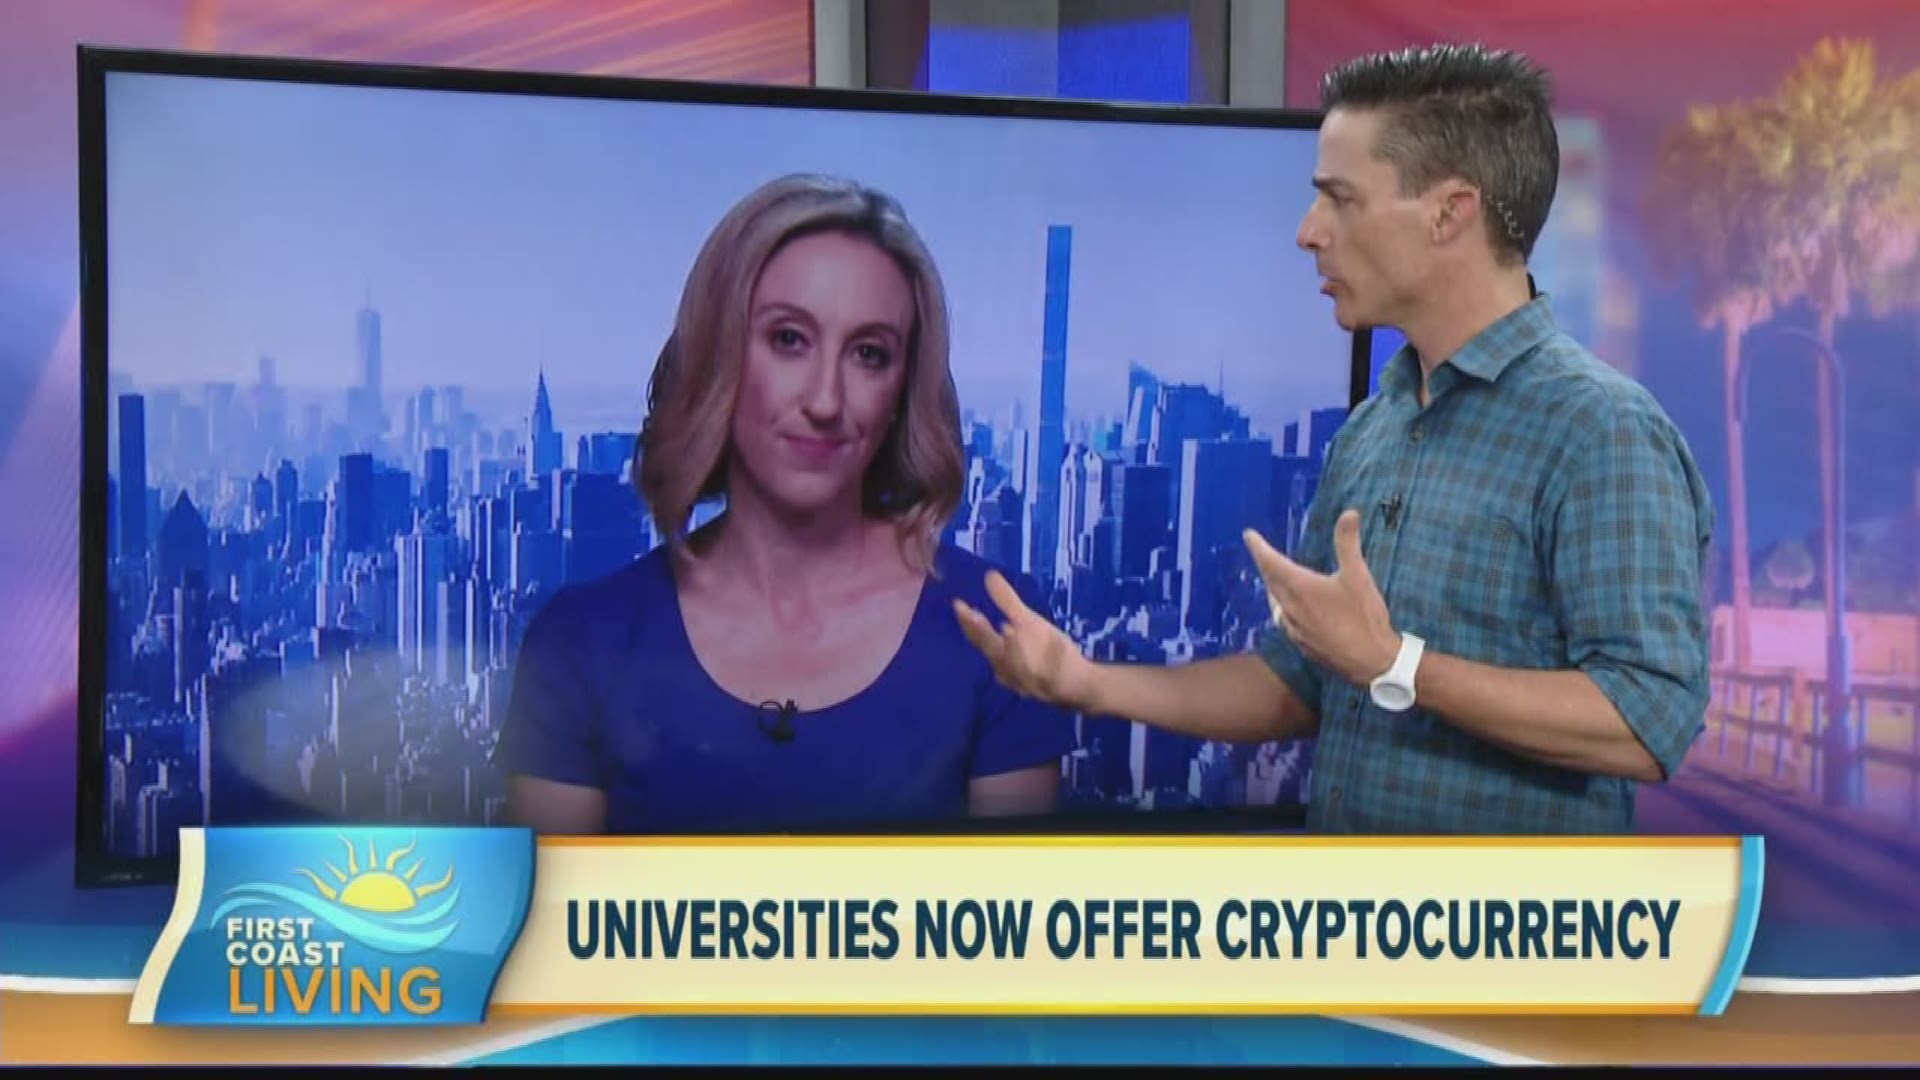 Cryptocurrency is now being offered as a college course for students to learn more about it